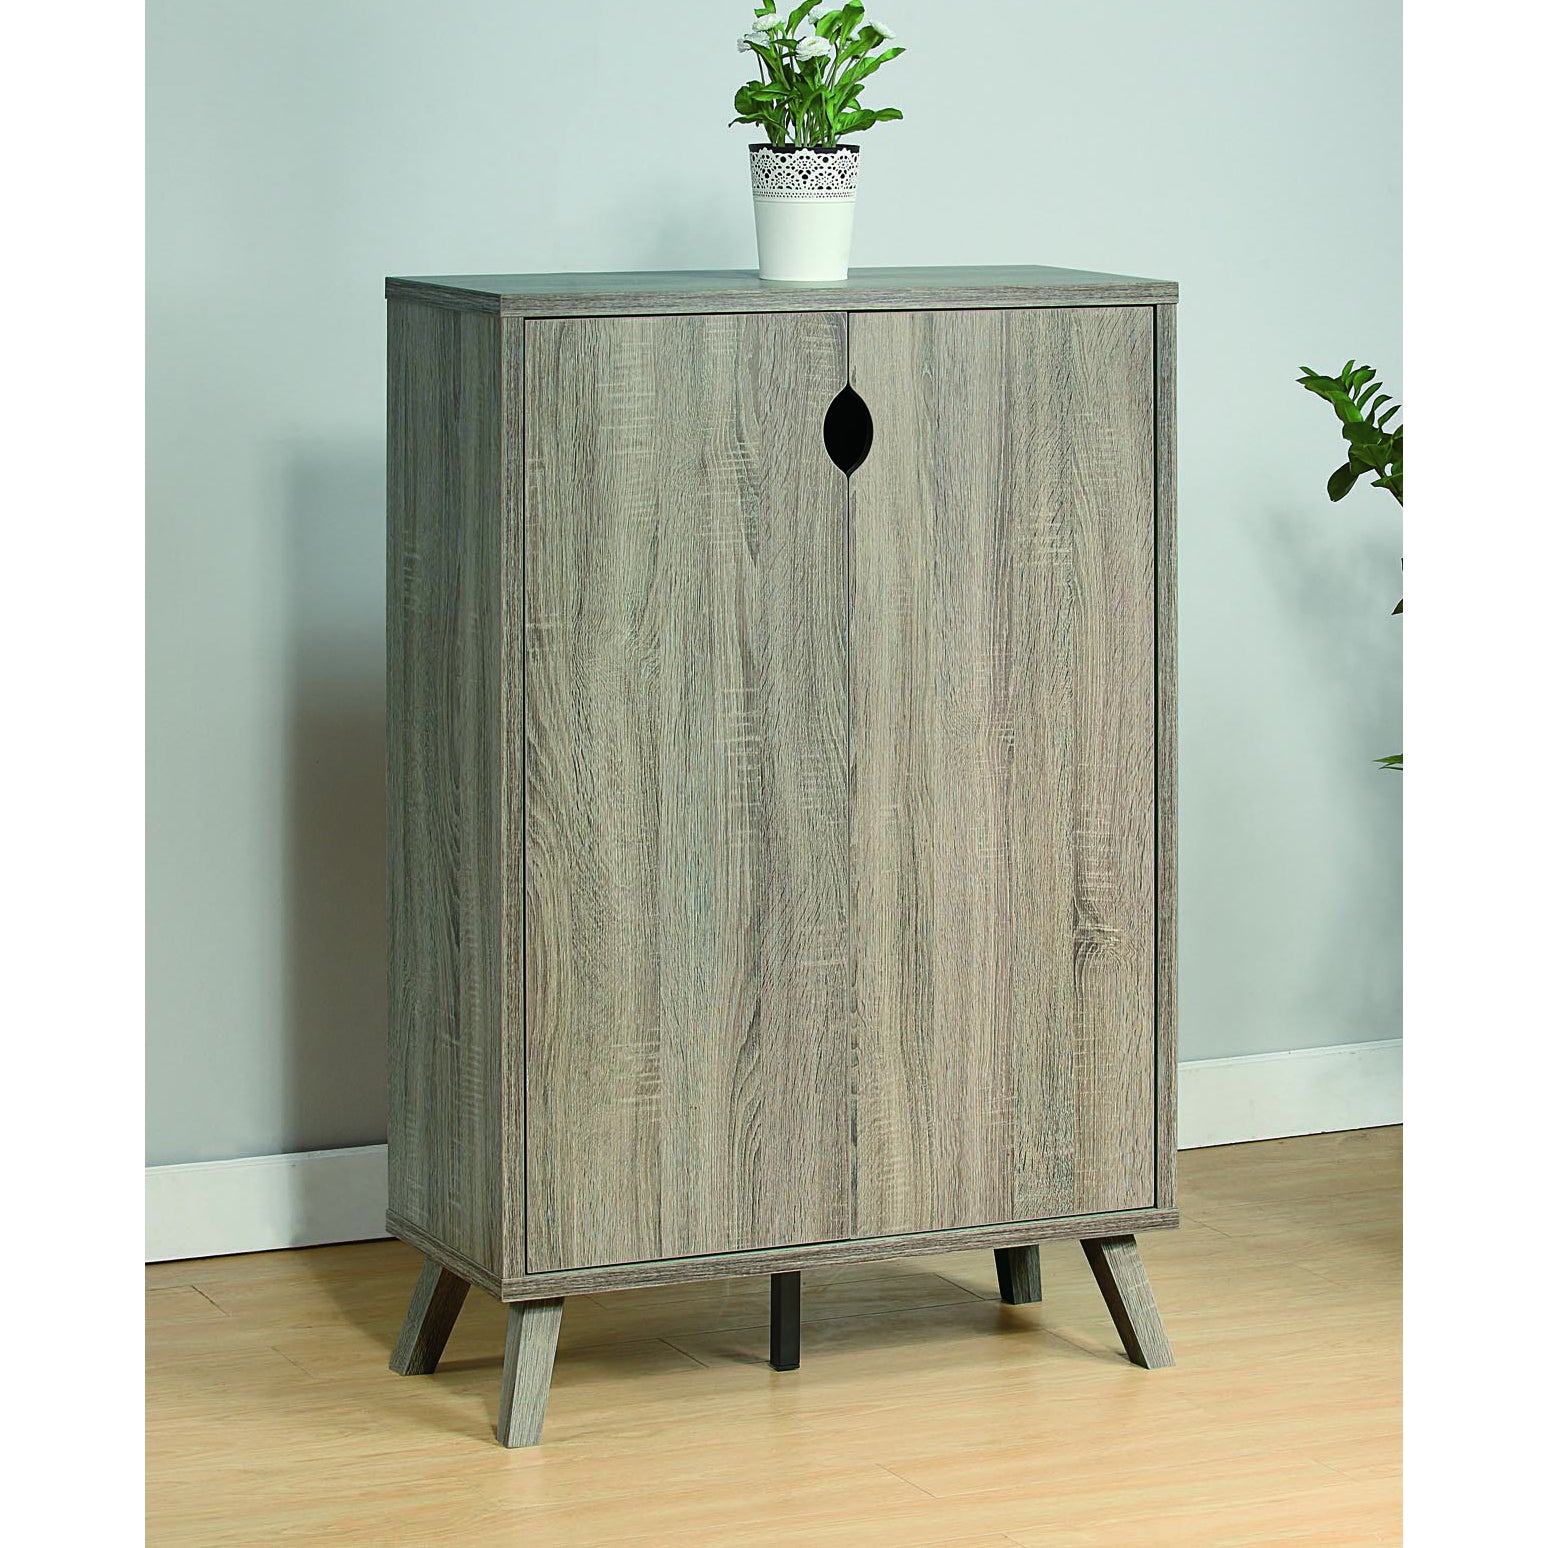 ID USA 151139 Shoe Cabinet Dark Taupe taupe-particle board